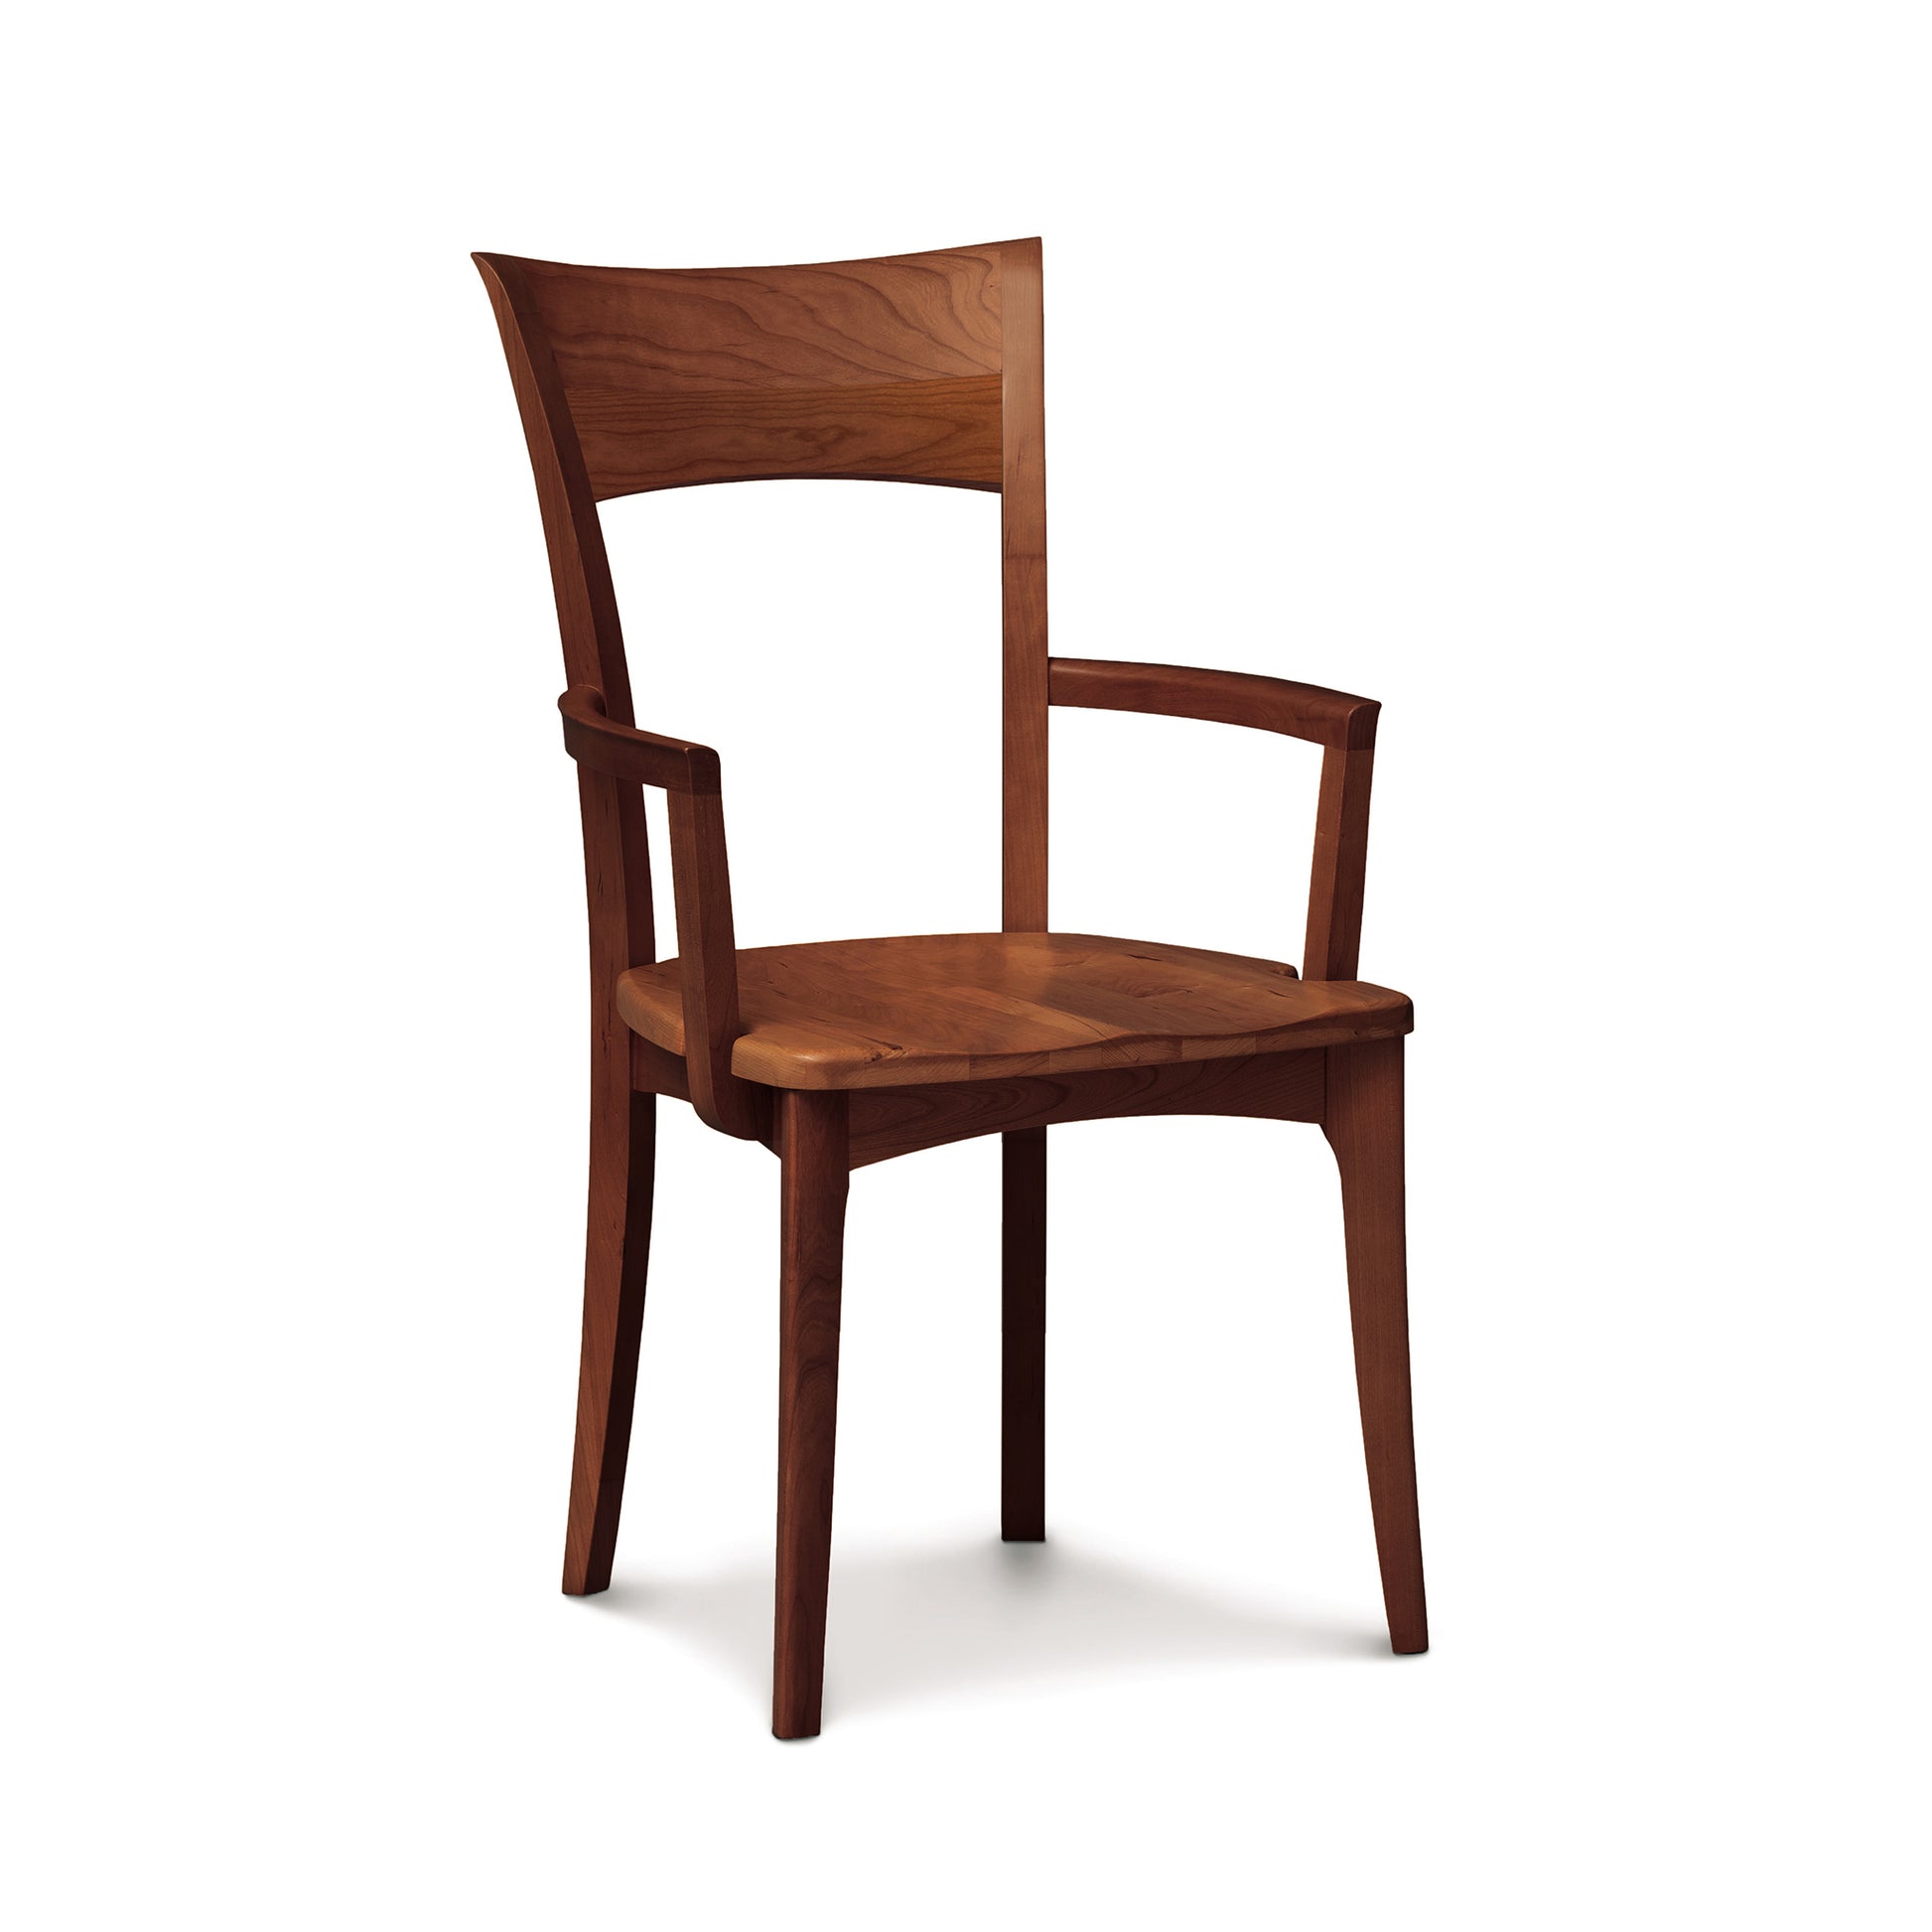 Ingrid Shaker Chair with Wood Seat from Copeland Furniture, with a curved backrest, isolated on a white background.